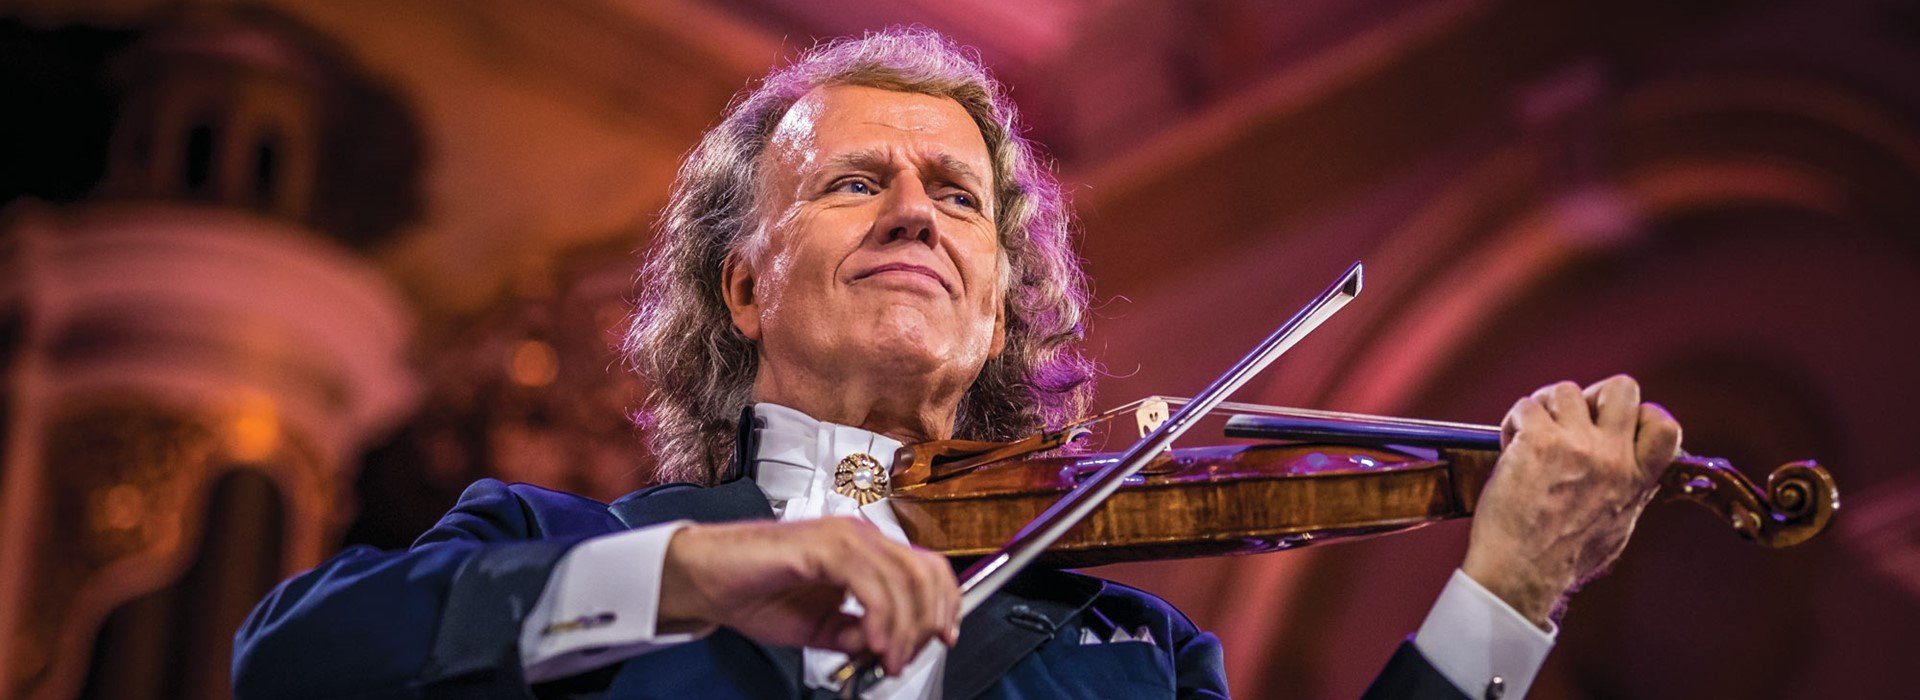 tourhub | Newmarket Holidays | Andre Rieu New Year's Concert in Amsterdam 